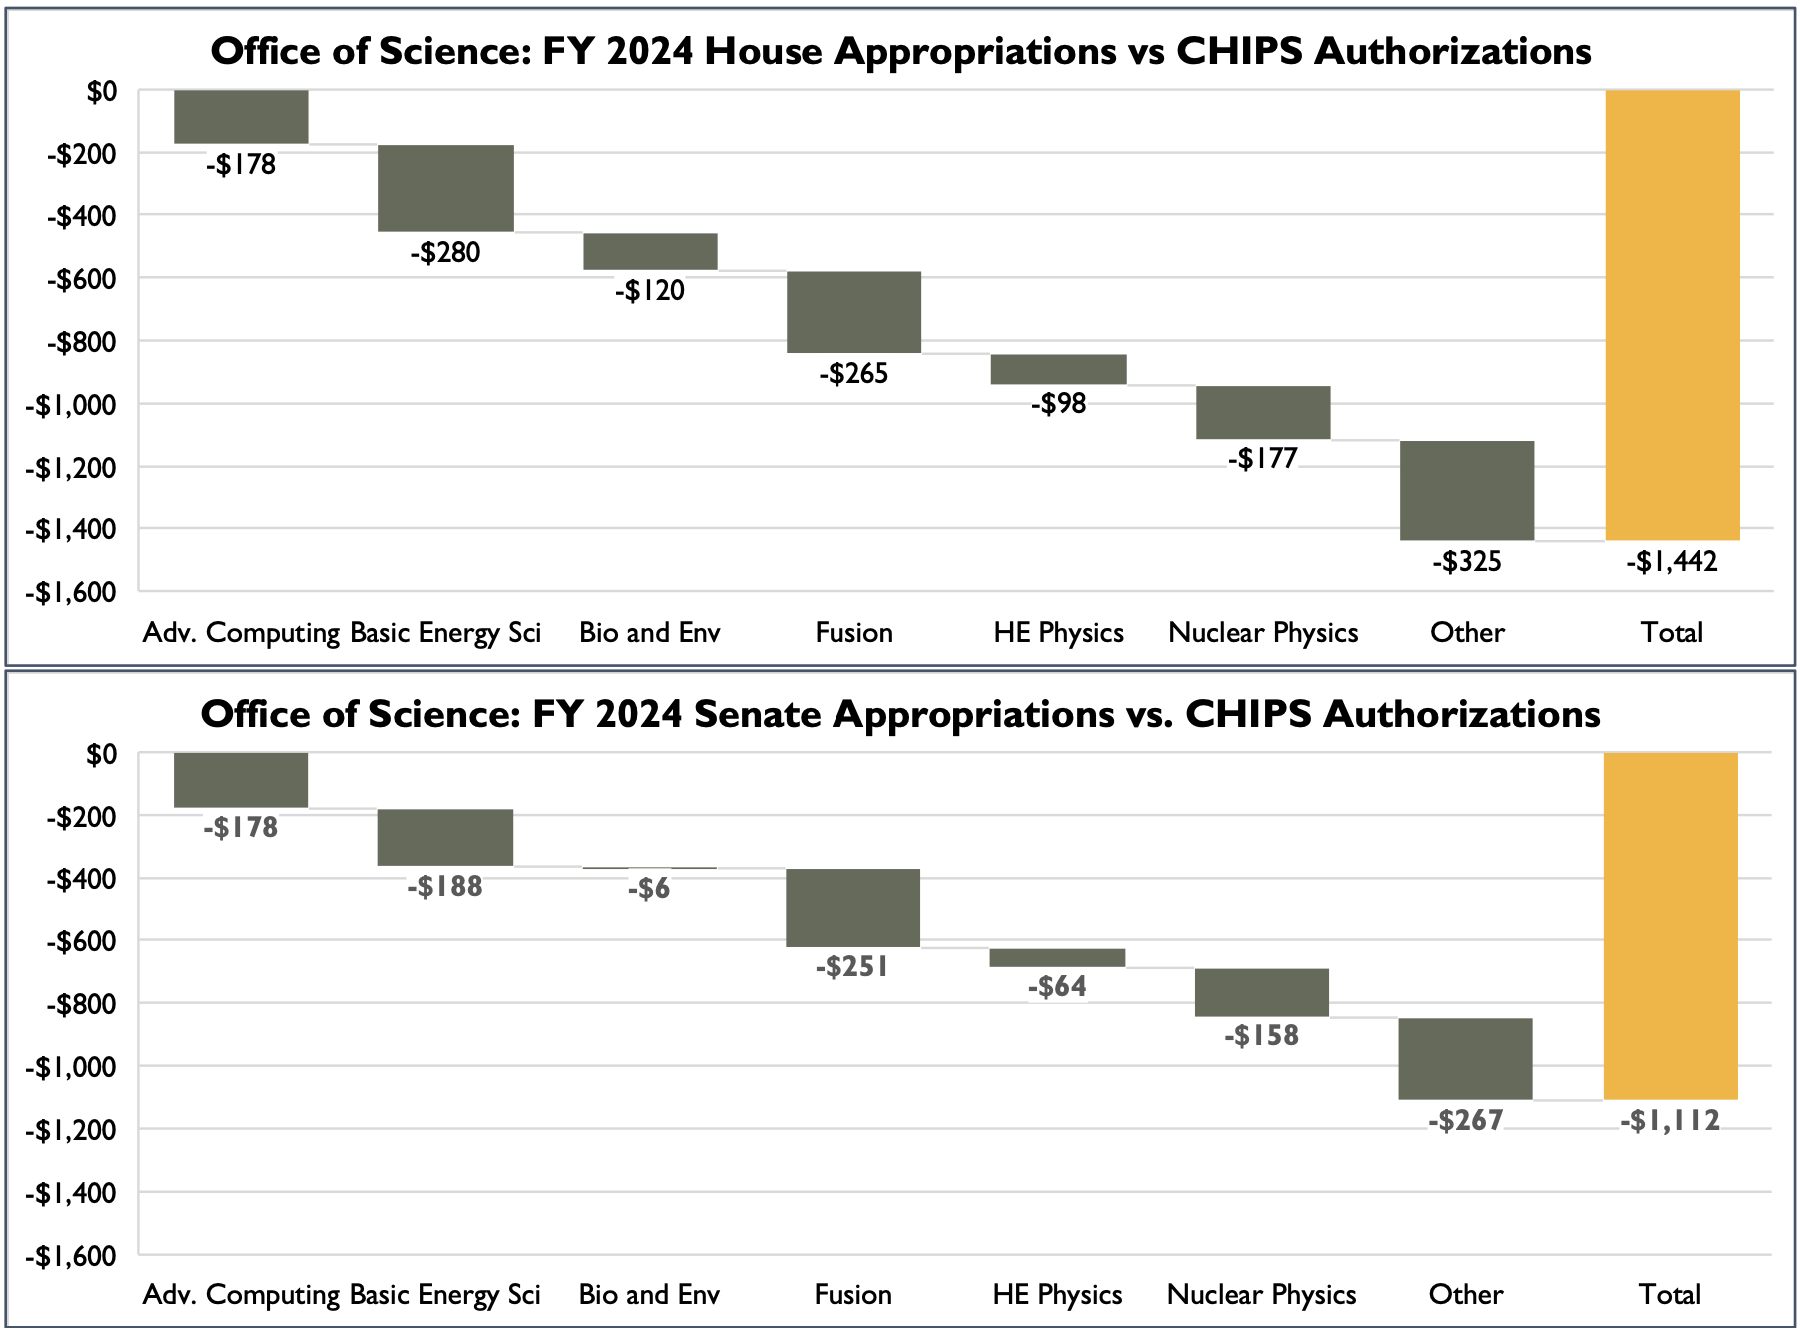 In both the House and the Senate, FY24 Appropriations fall far short of CHIPS authorizations across research and education accounts.